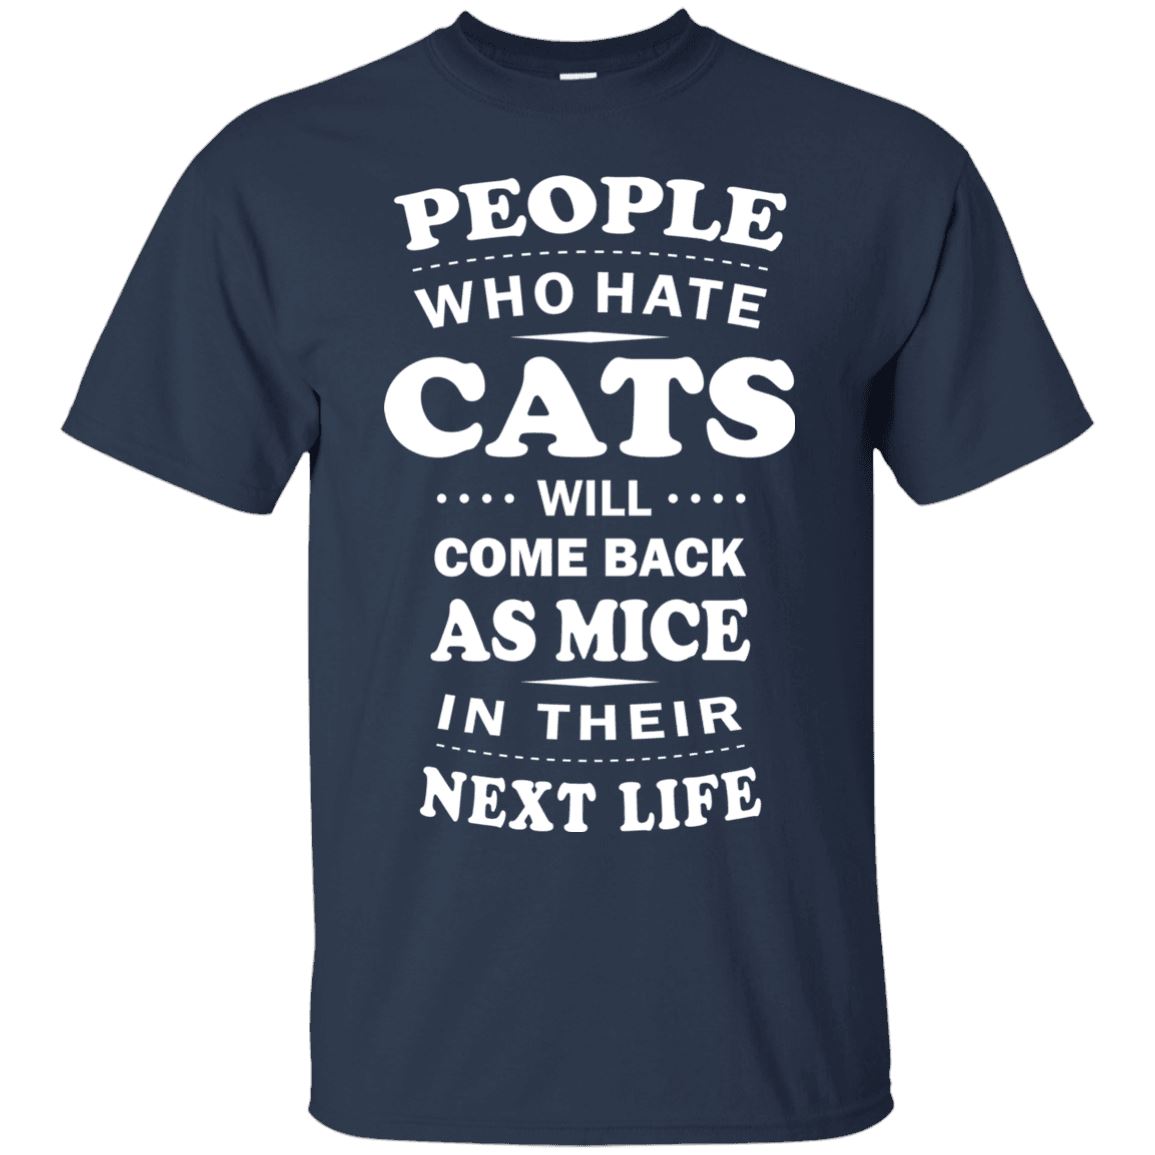 People Who Hate Cats Will Come Back As Mice - Cat Shirt – CatsForLife